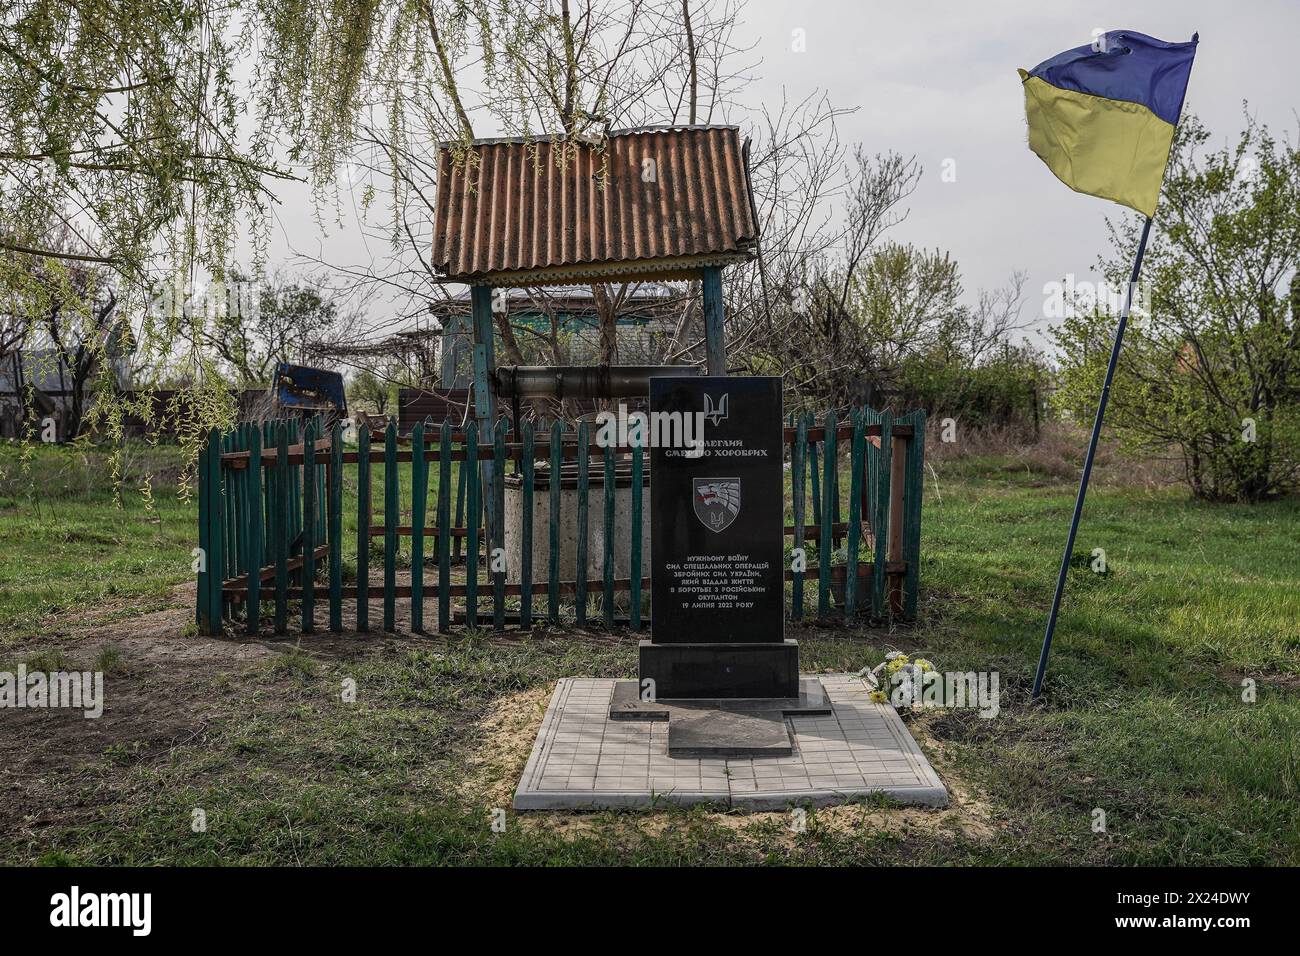 Yevhen Vasyliev/Le Pictorium - HRAKOVE, KHARKIV REGION - 12/04/2024 - Ukraine/kharkiv oblast/Hrakove - From February 25 to September 7, 2022, the village was occupied by the Russian army until it was liberated by the Ukrainian Armed Forces. The village was heavily damaged as it was on the front line under constant shelling for 195 days, and the consequences are still visible 19 months after de-occupation. The school, the village council building, the church, shops, private and apartment buildings - everything was destroyed. A torture chamber was set up in one of the basements of an Stock Photo